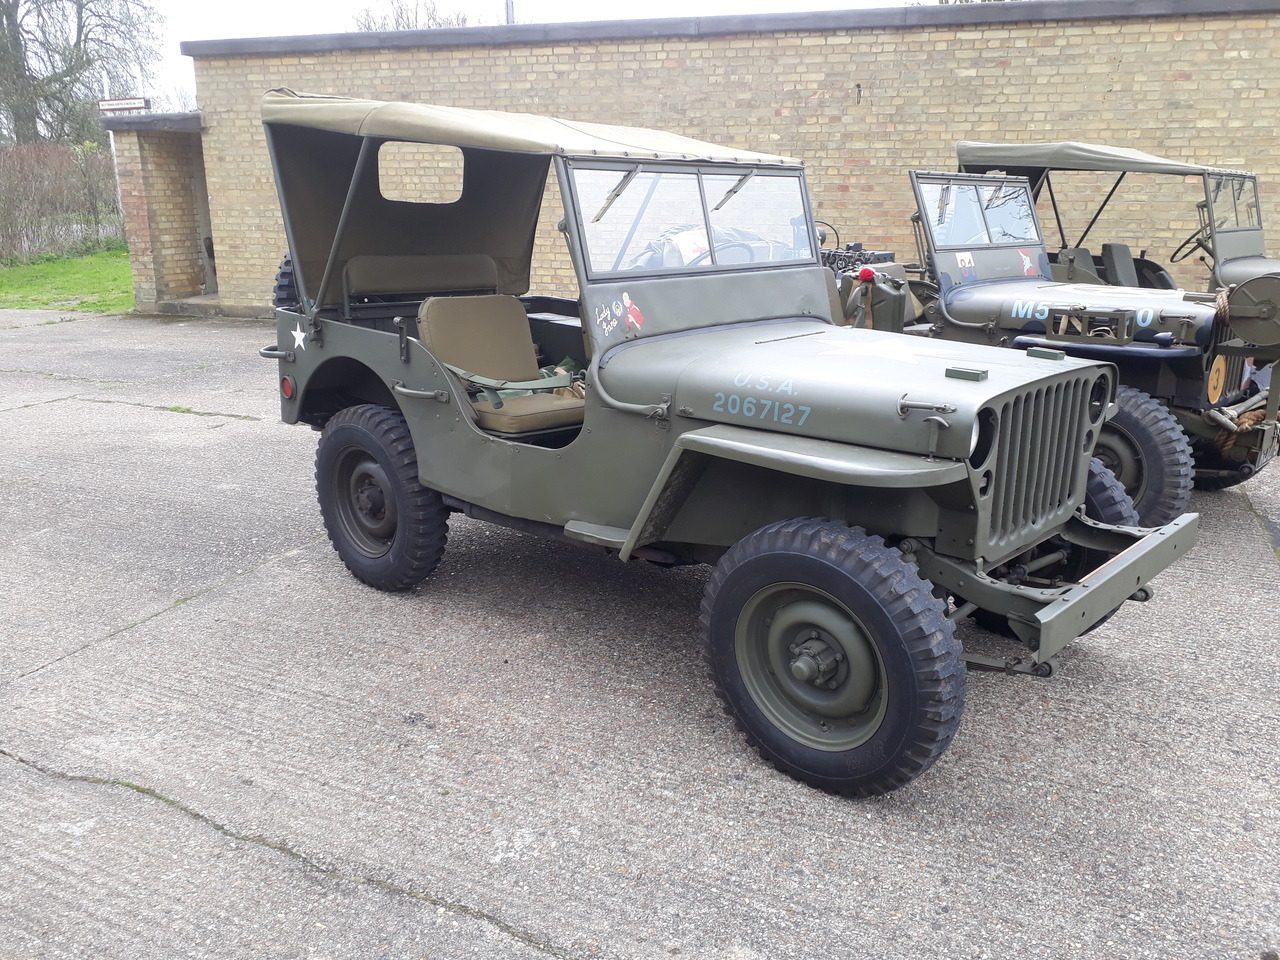 garrandheyford:  We had a few jeeps stop by last Sunday. At our open day in September,